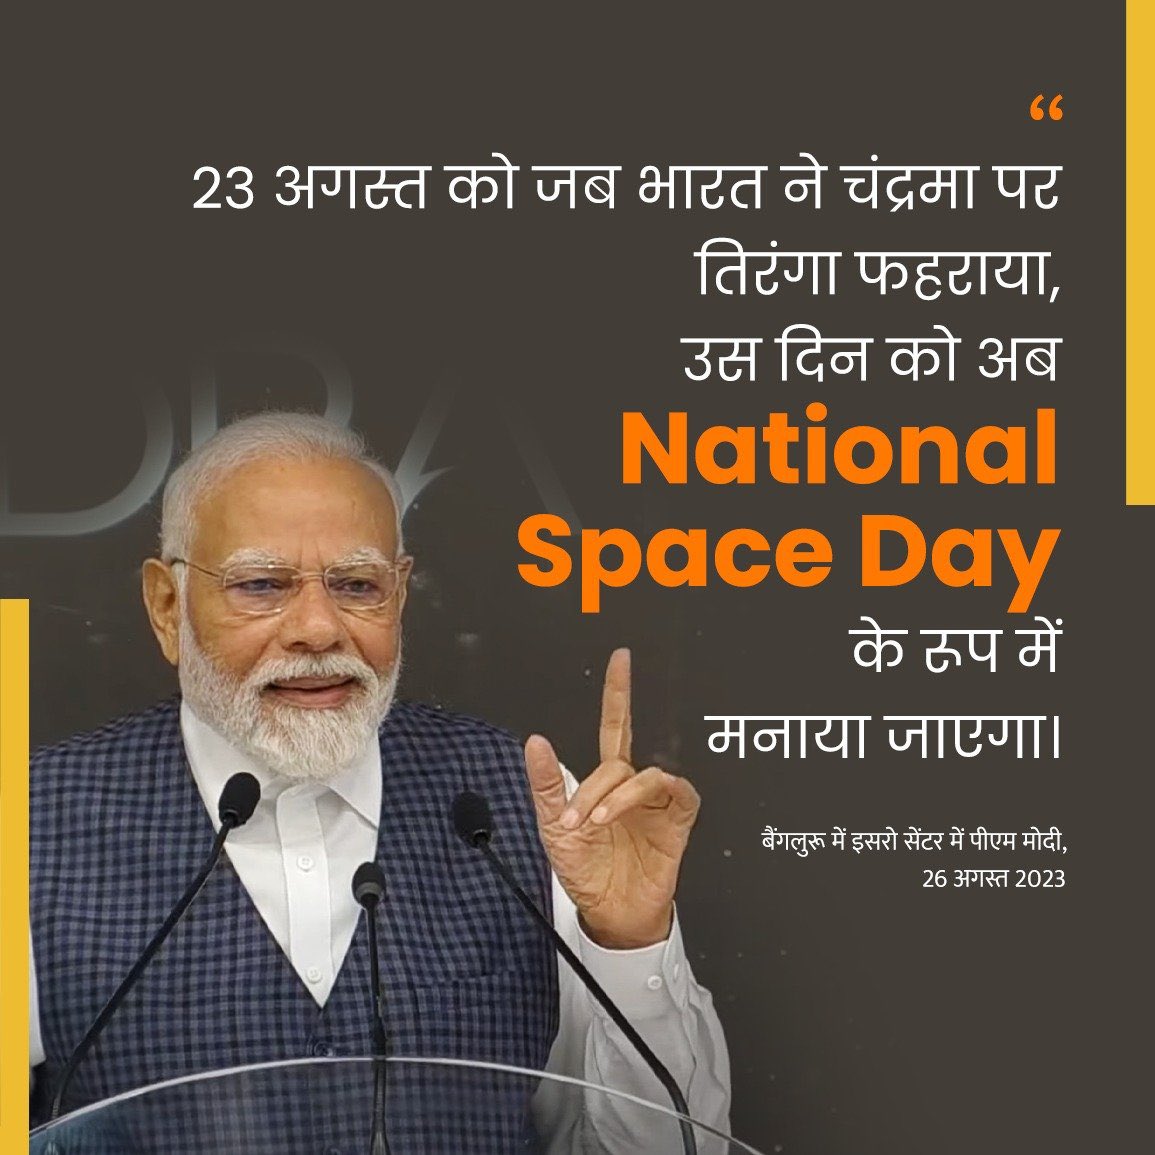 #NationalSpaceDay 
#23August